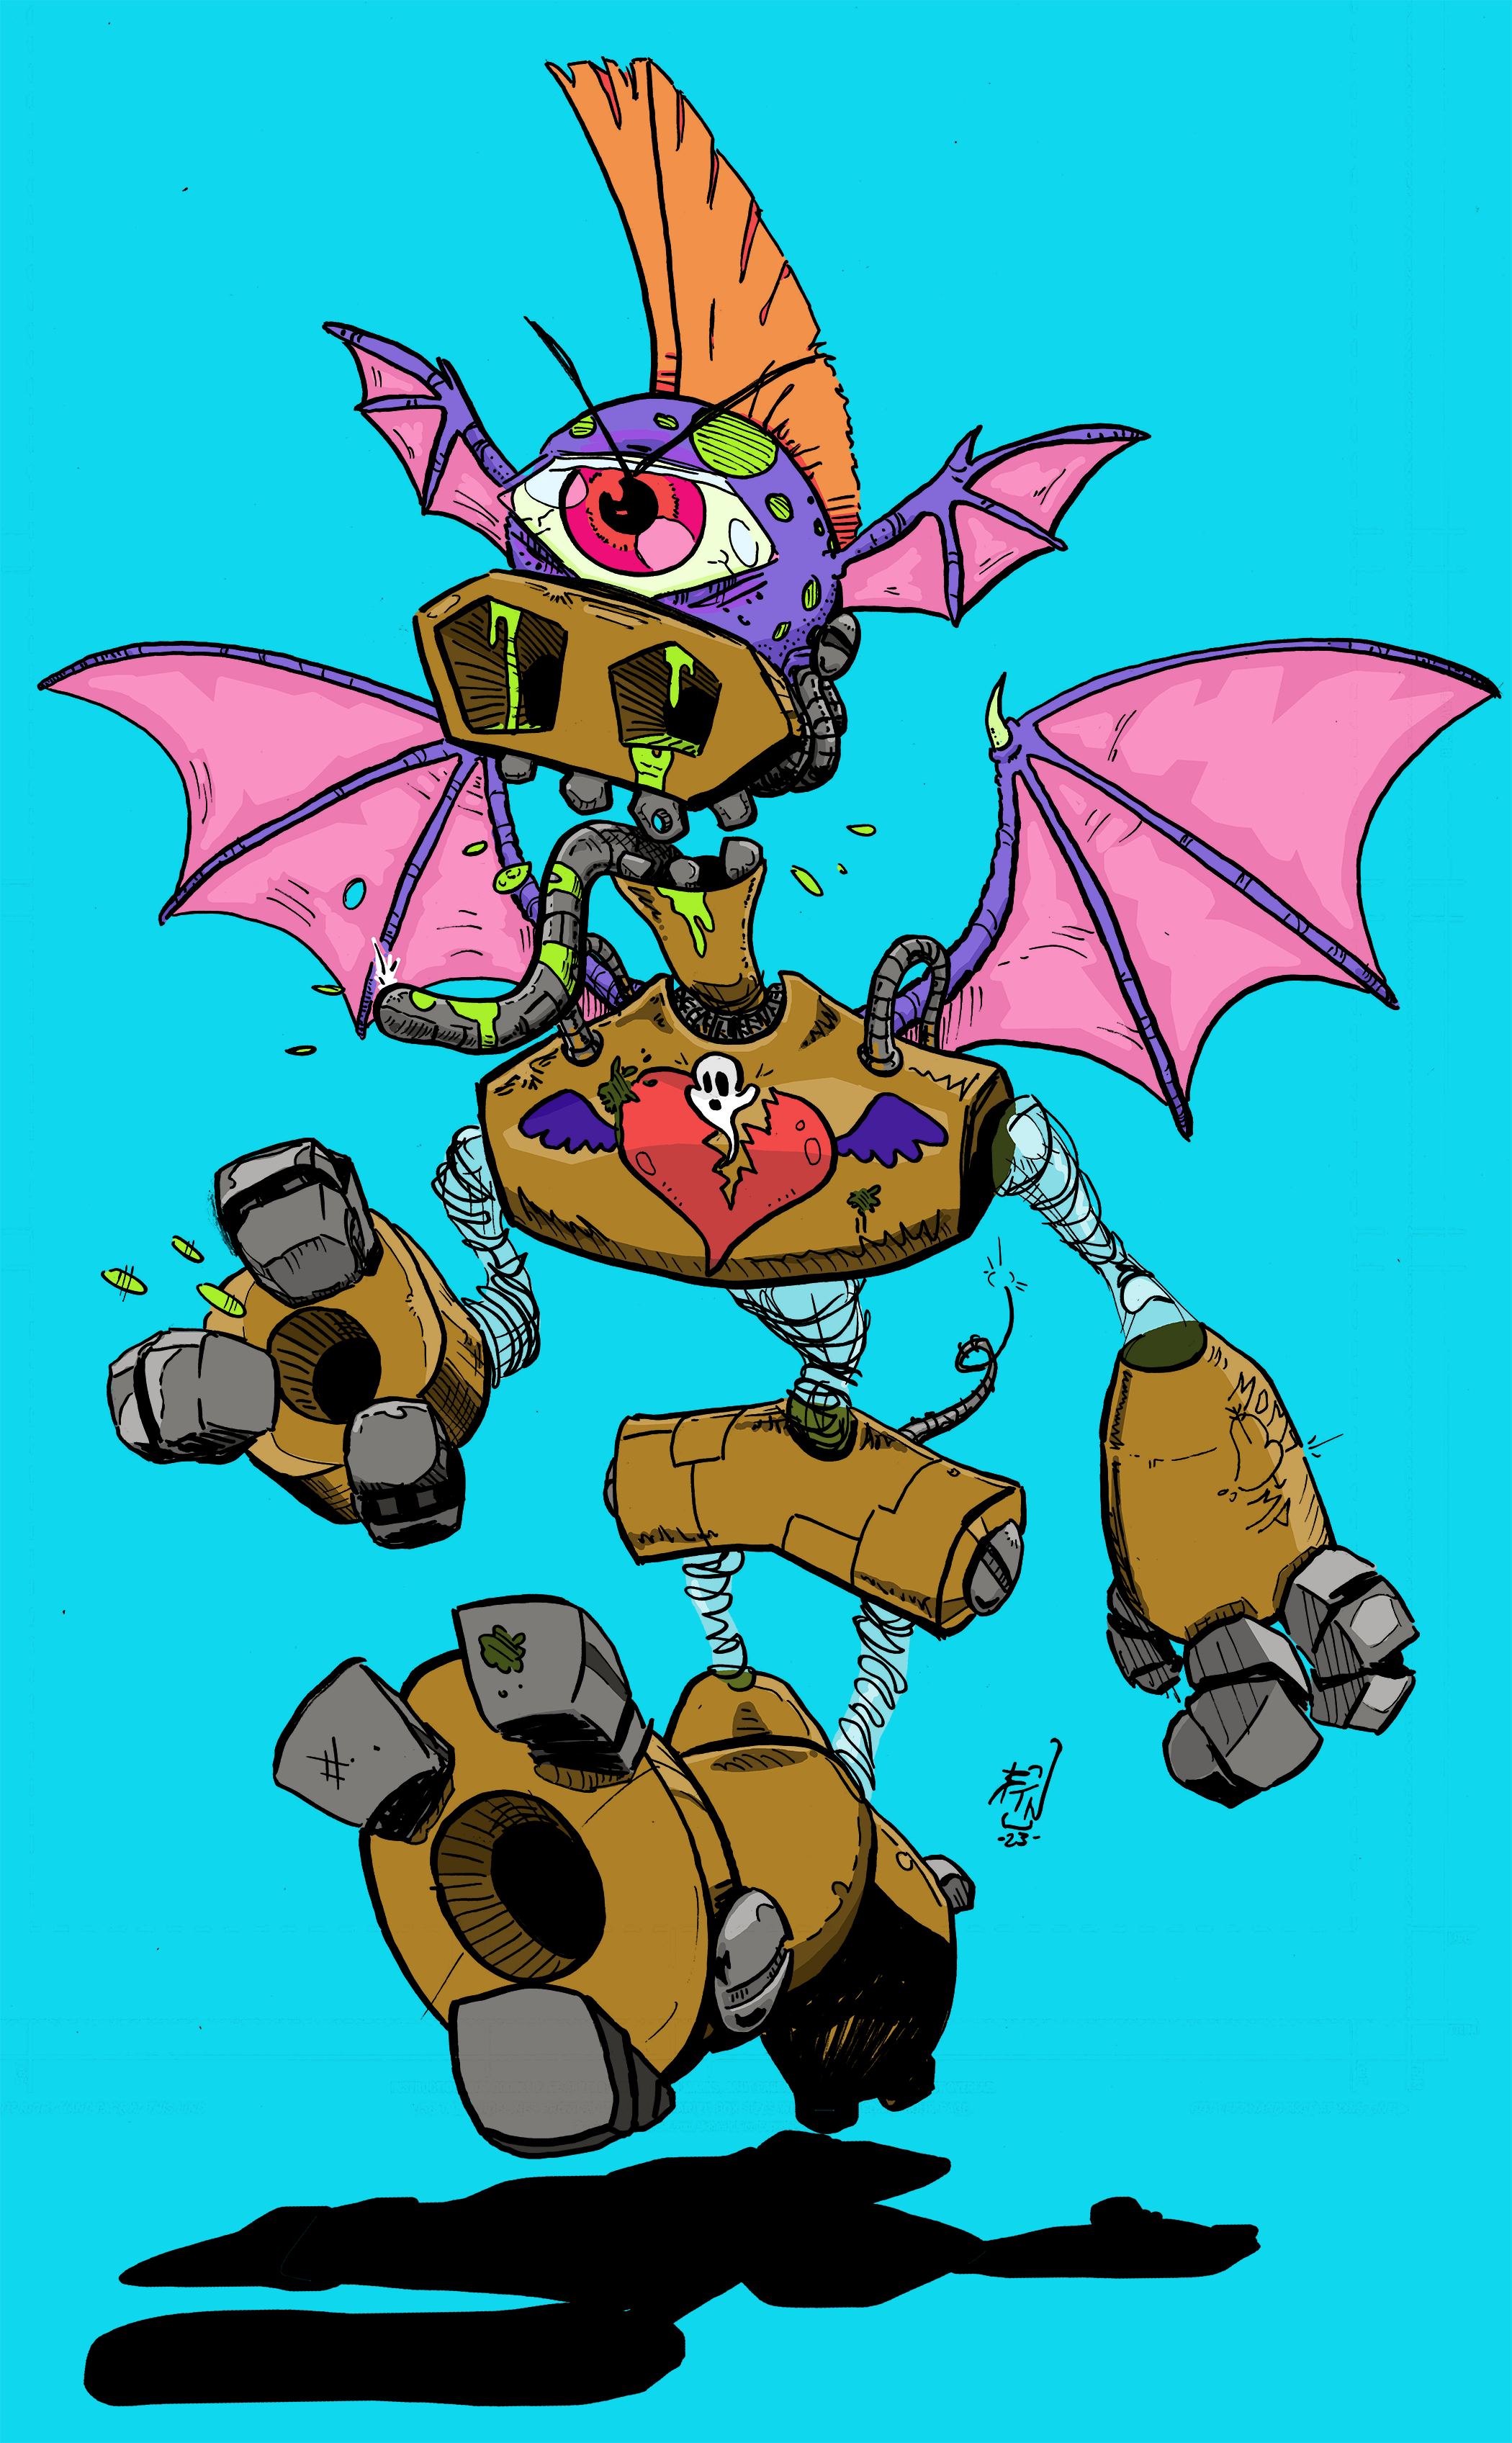 Sickotron - Puggles Robot from Sick Fiction Podcast